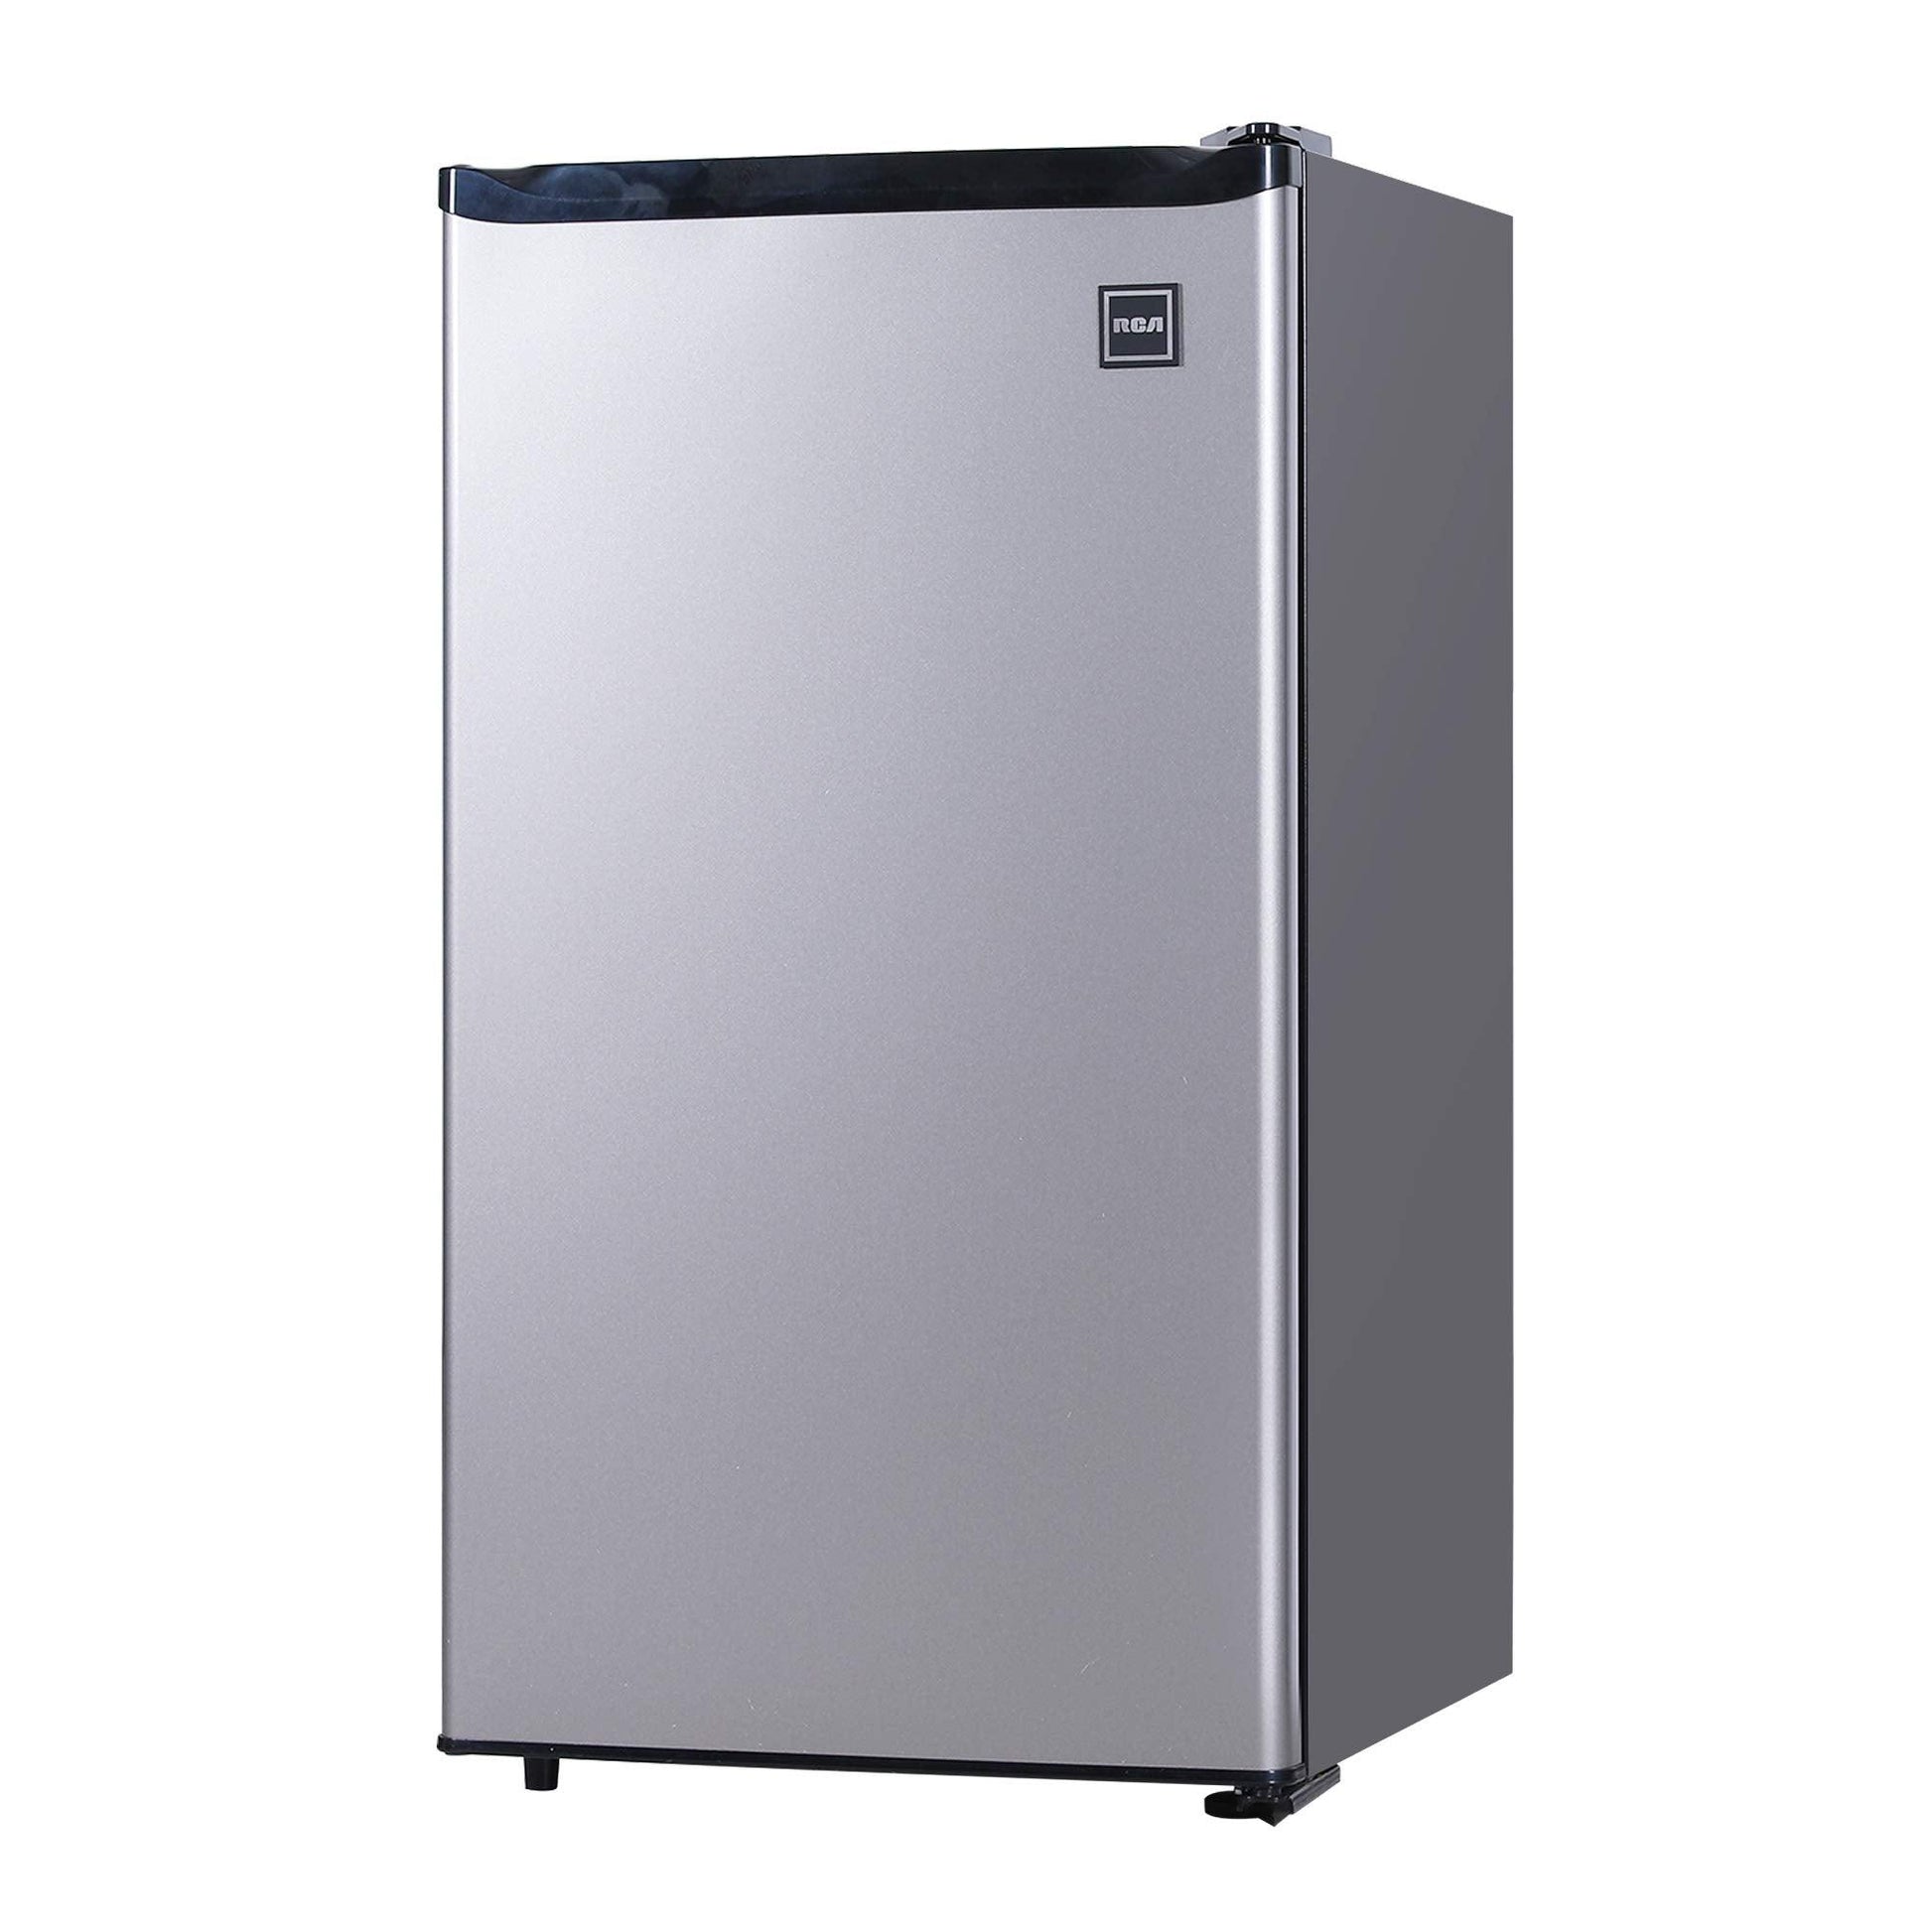 RCA RFR322 Mini Refrigerator, Compact Freezer Compartment, Adjustable Thermostat Control, Reversible Door, Ideal Fridge for Dorm, Office, Apartment, Platinum Stainless, 3.2 Cubic Feet - CookCave